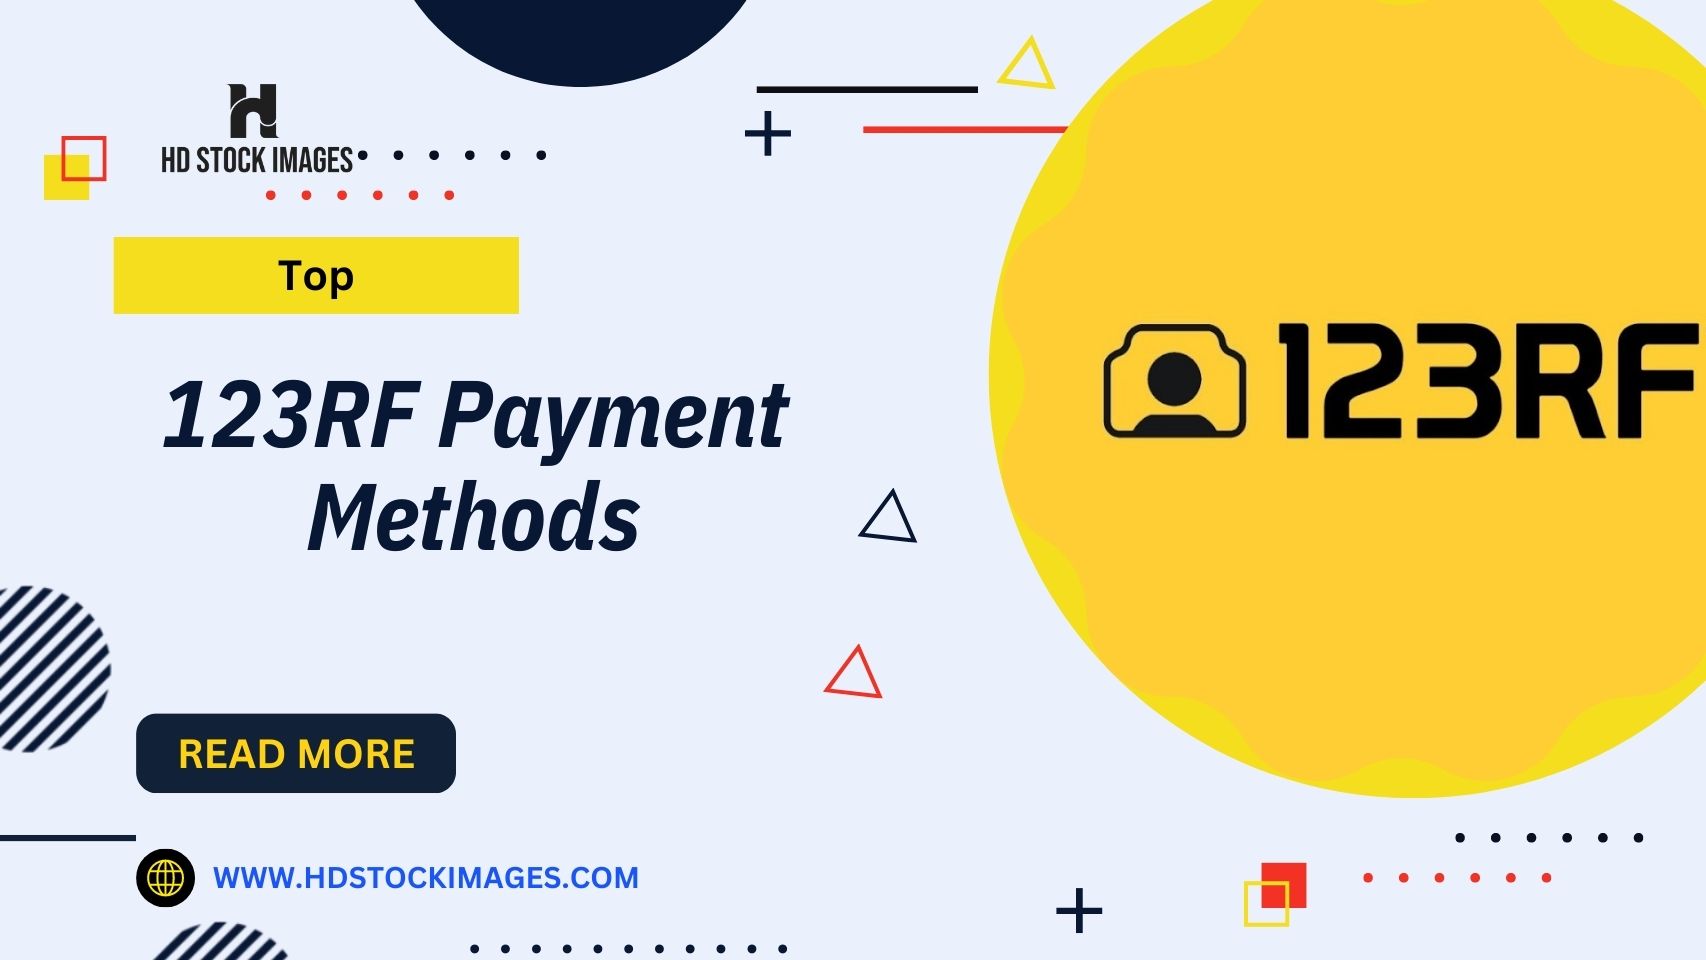 123RF Payment Methods: Options for Receiving Earnings as a Contributor